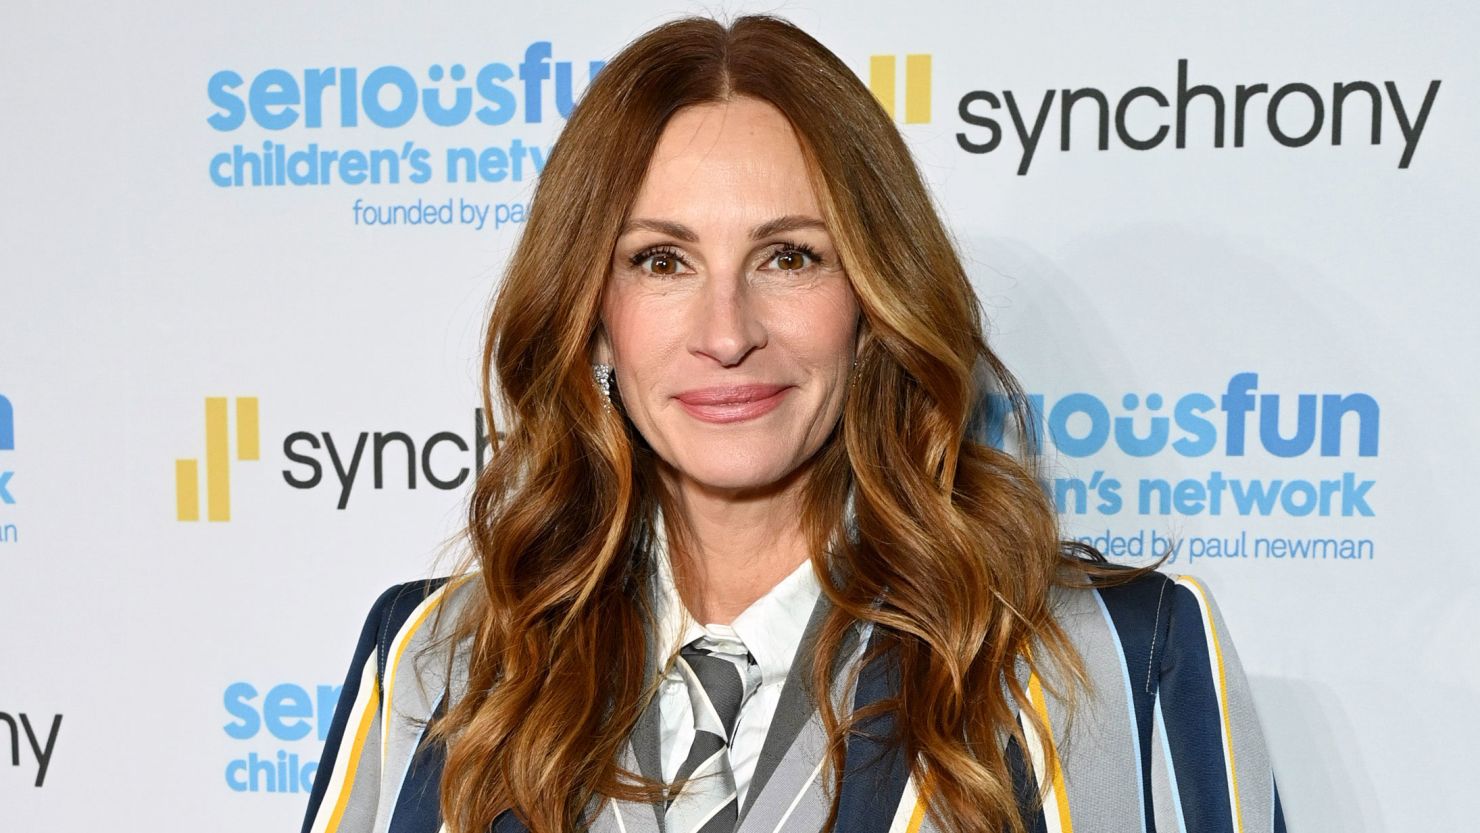 Julia Roberts has discovered she's not actually a Roberts